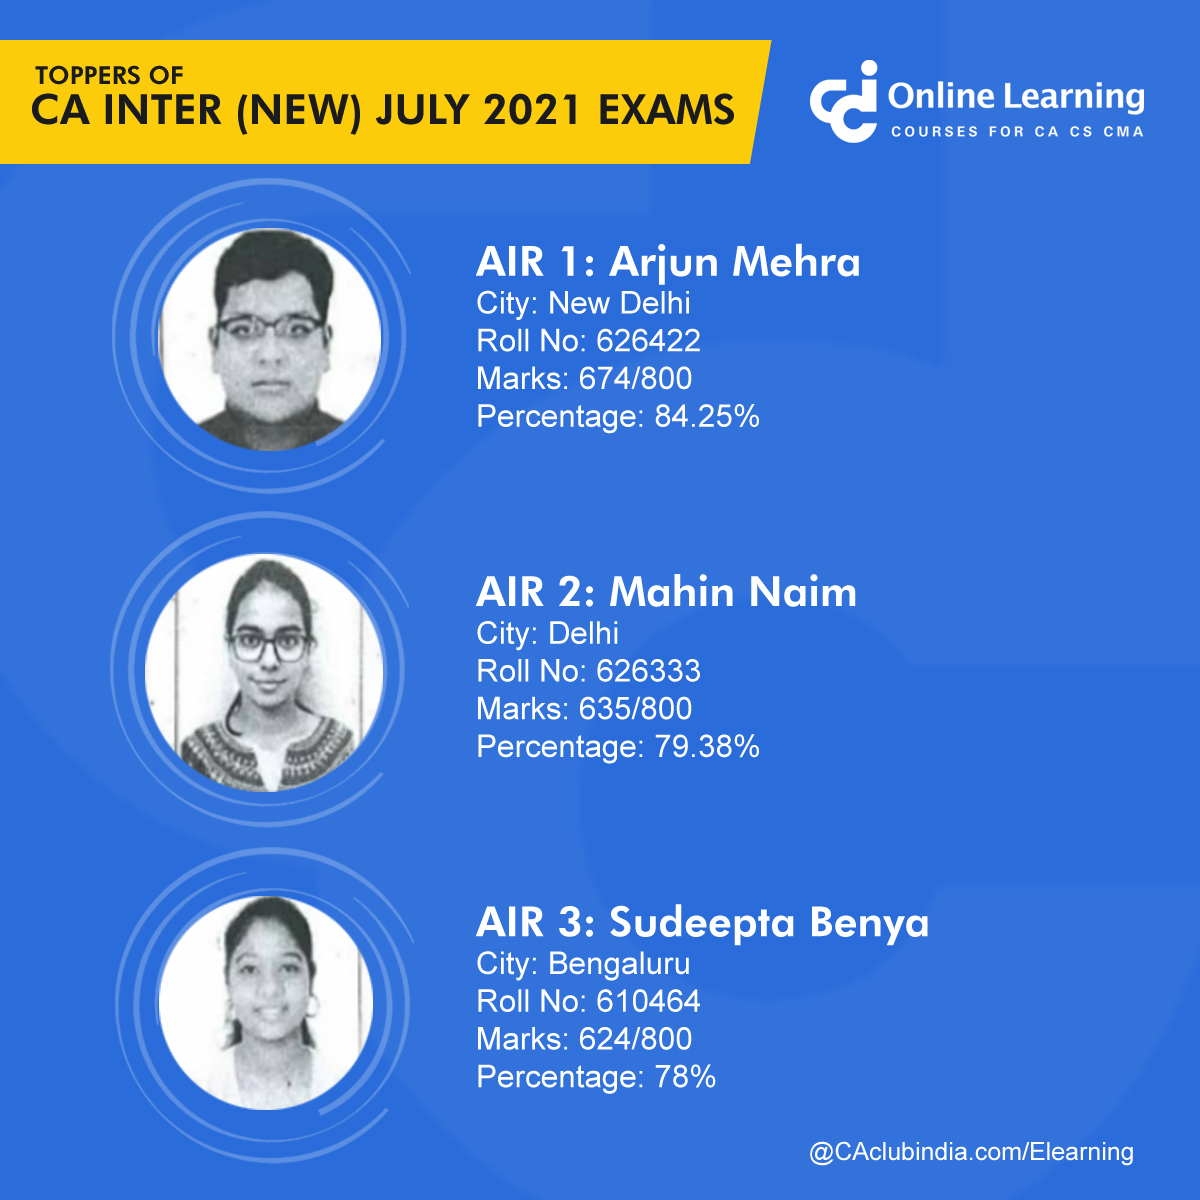 Toppers of CA Intermediate (New Scheme) Examination held in July 2021 Exams